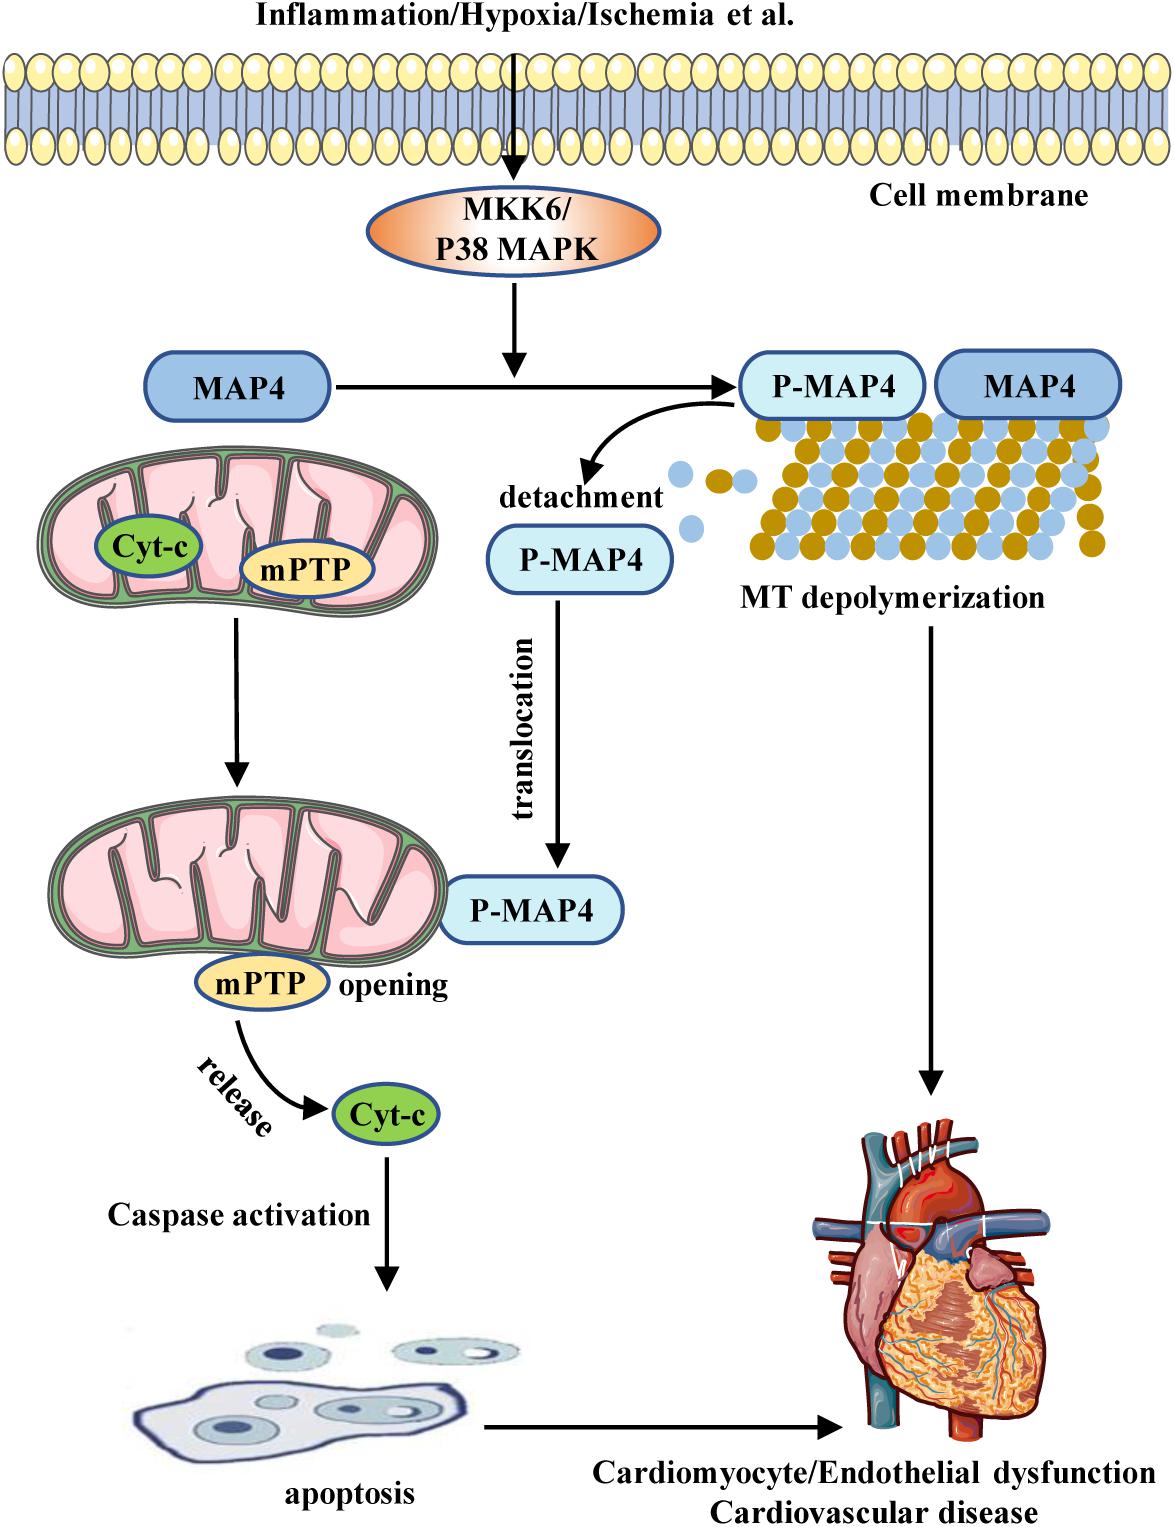 frontiers-map4-as-a-new-candidate-in-cardiovascular-disease